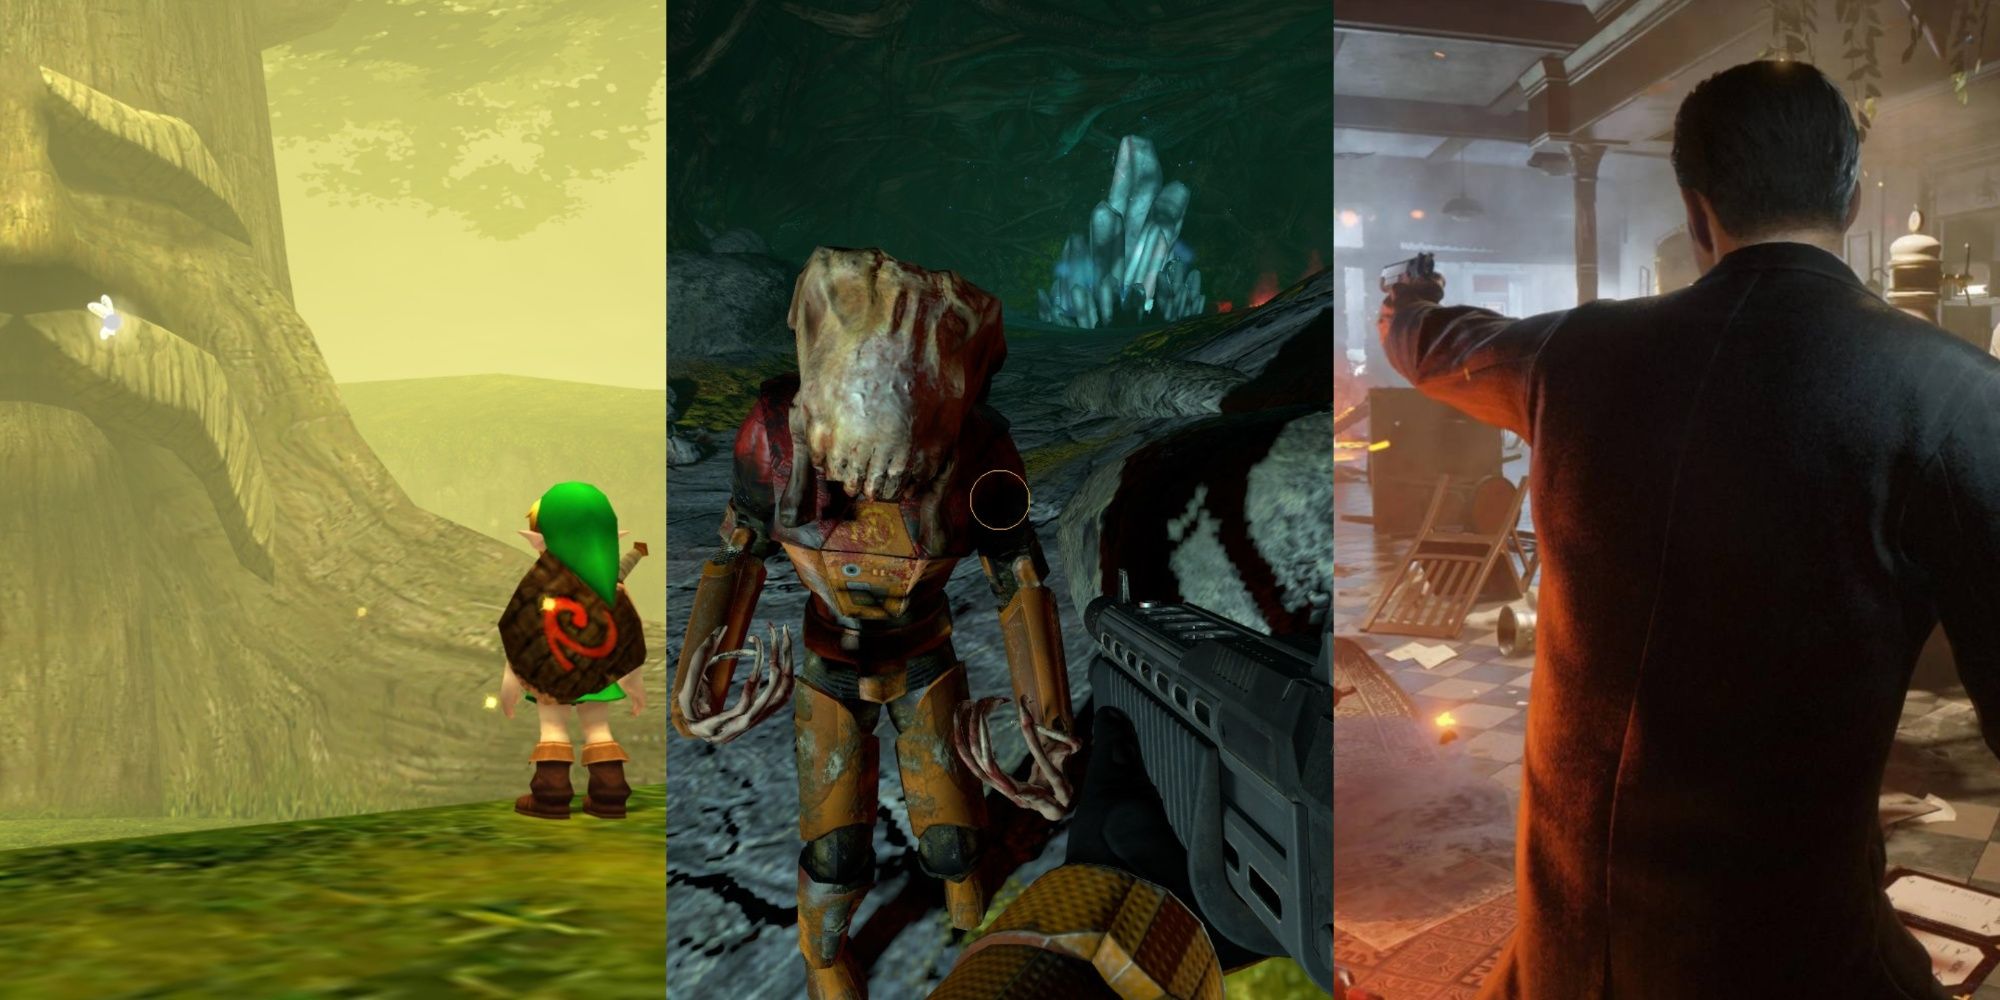 A collage of images from Ocarina Of Time 3D, Black Mesa and Mafia Definitive Edition